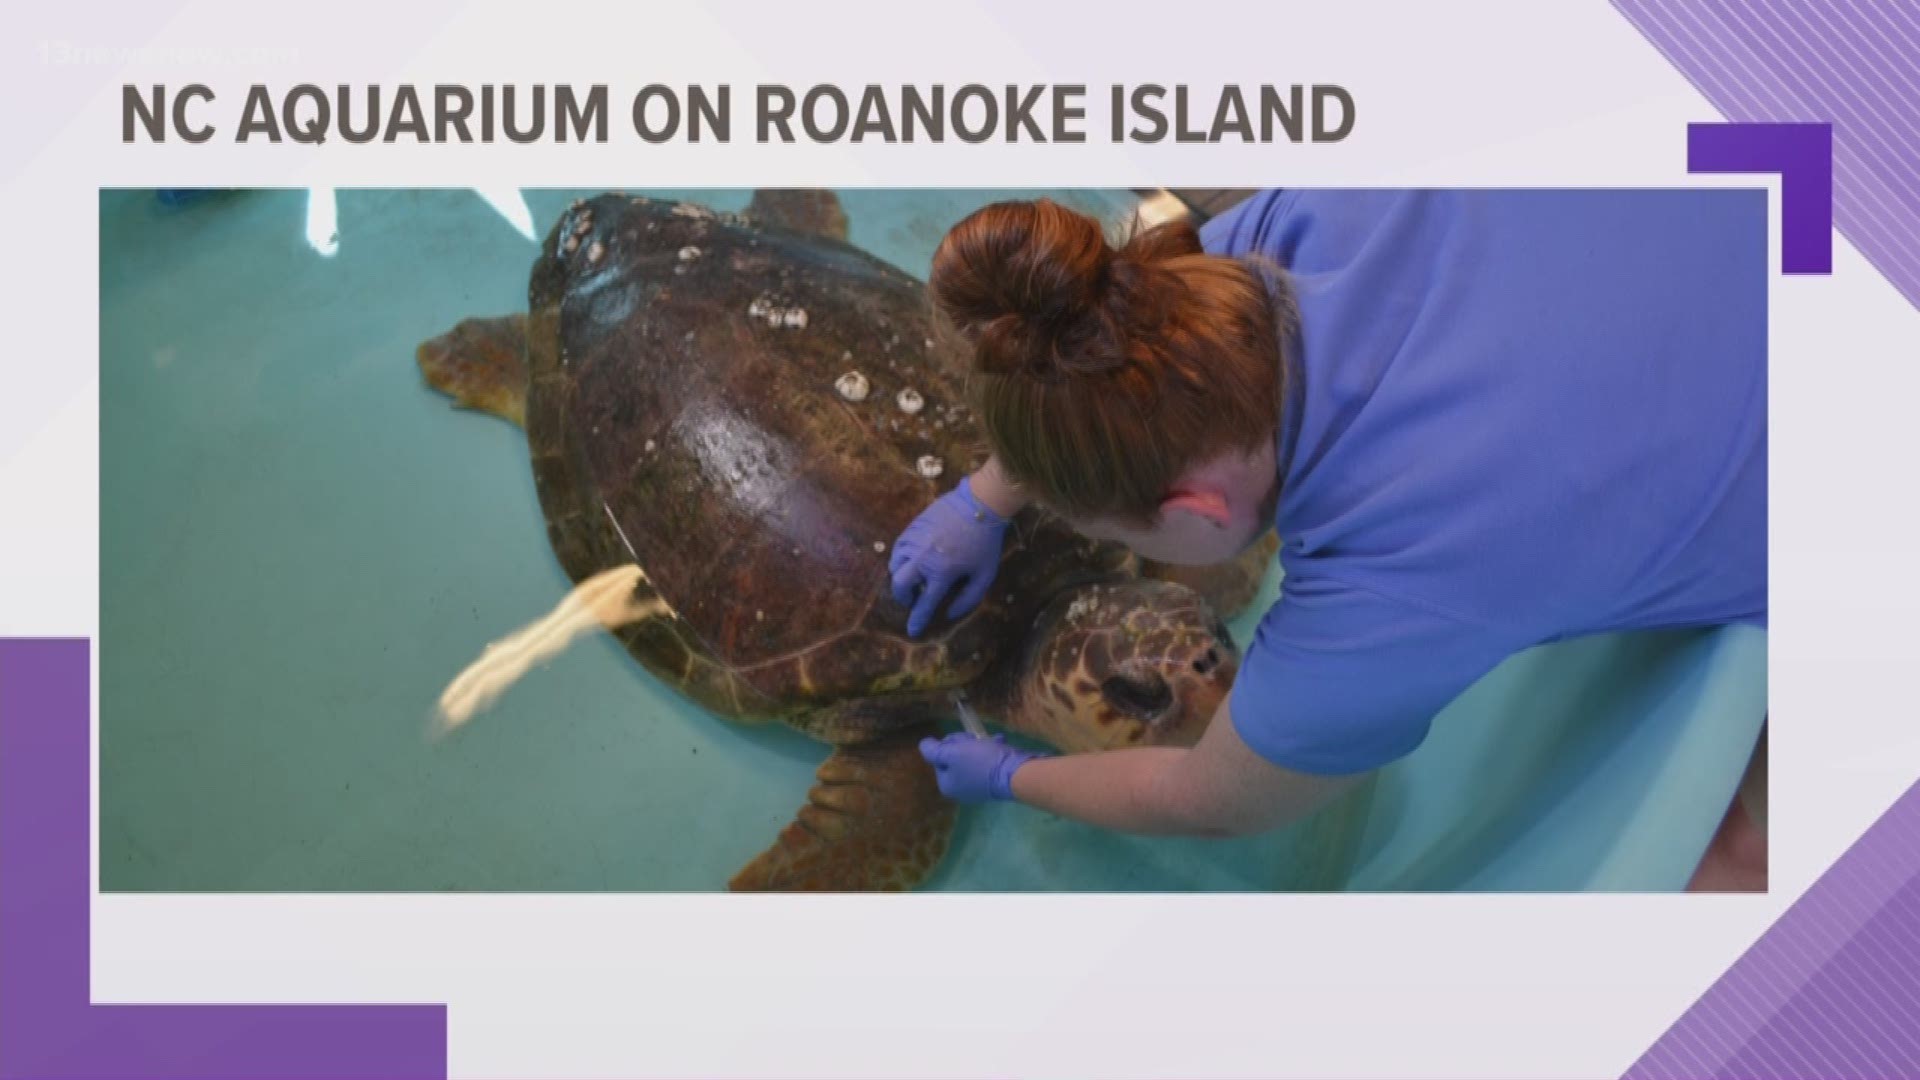 Officials at the aquarium said the 189-pound turtle is receiving fluids and is currently resting.